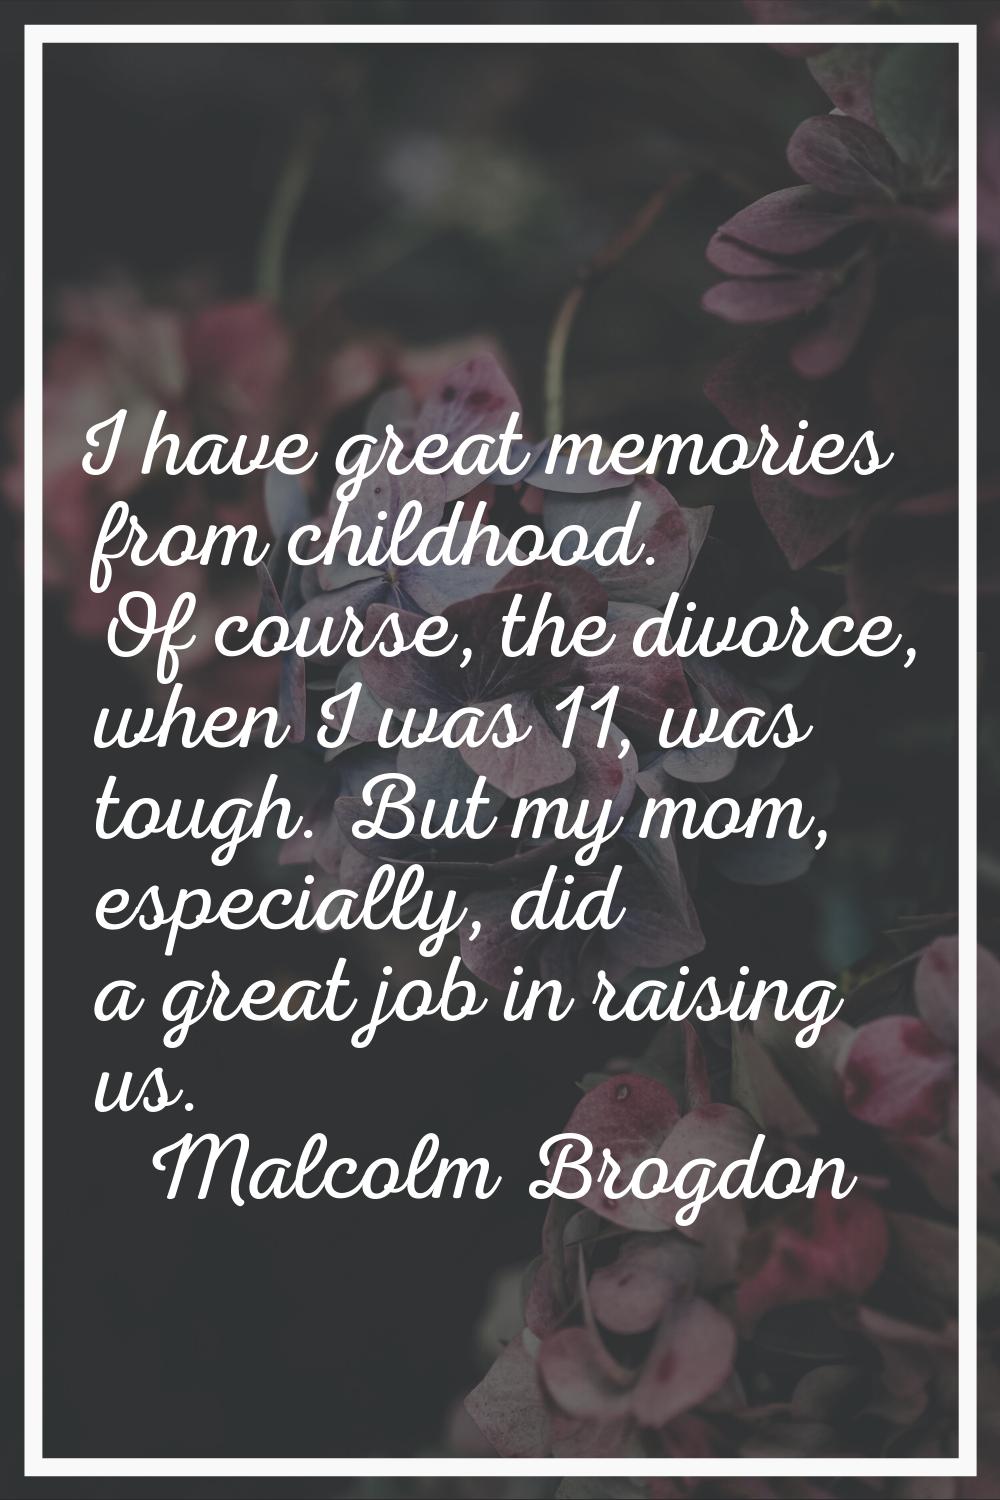 I have great memories from childhood. Of course, the divorce, when I was 11, was tough. But my mom,